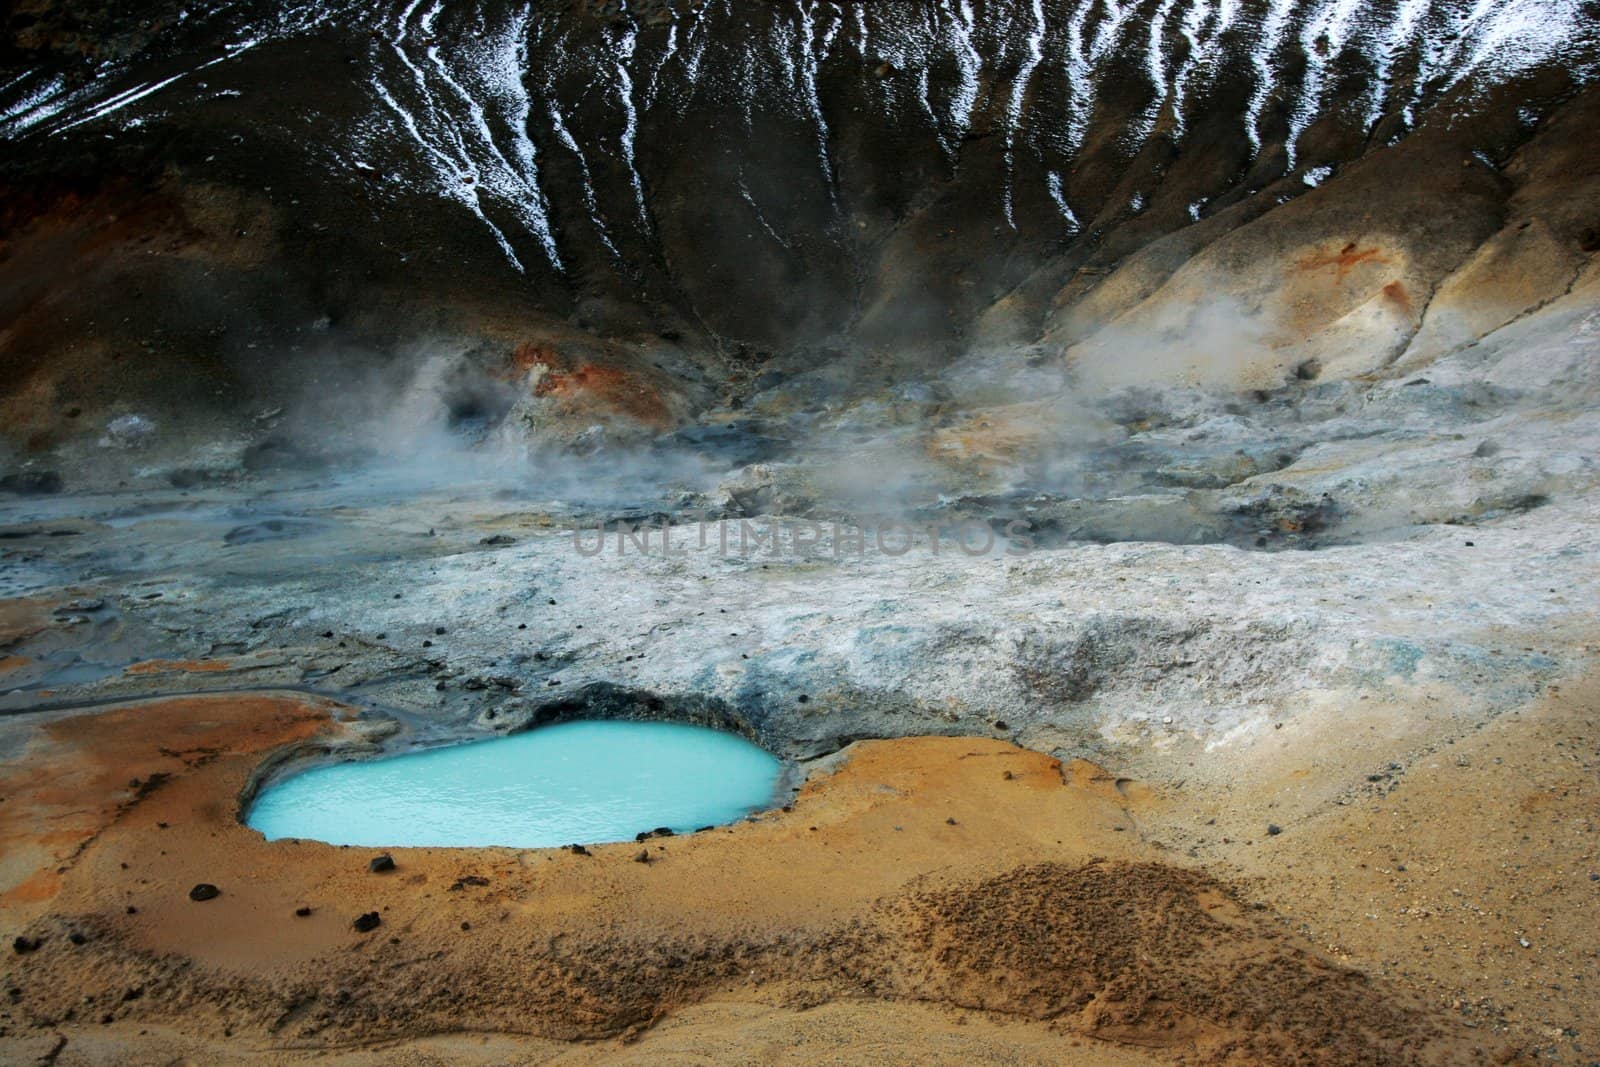 Out of this world landscape - this is taken in Iceland in a geothermal spot with various hotsprings